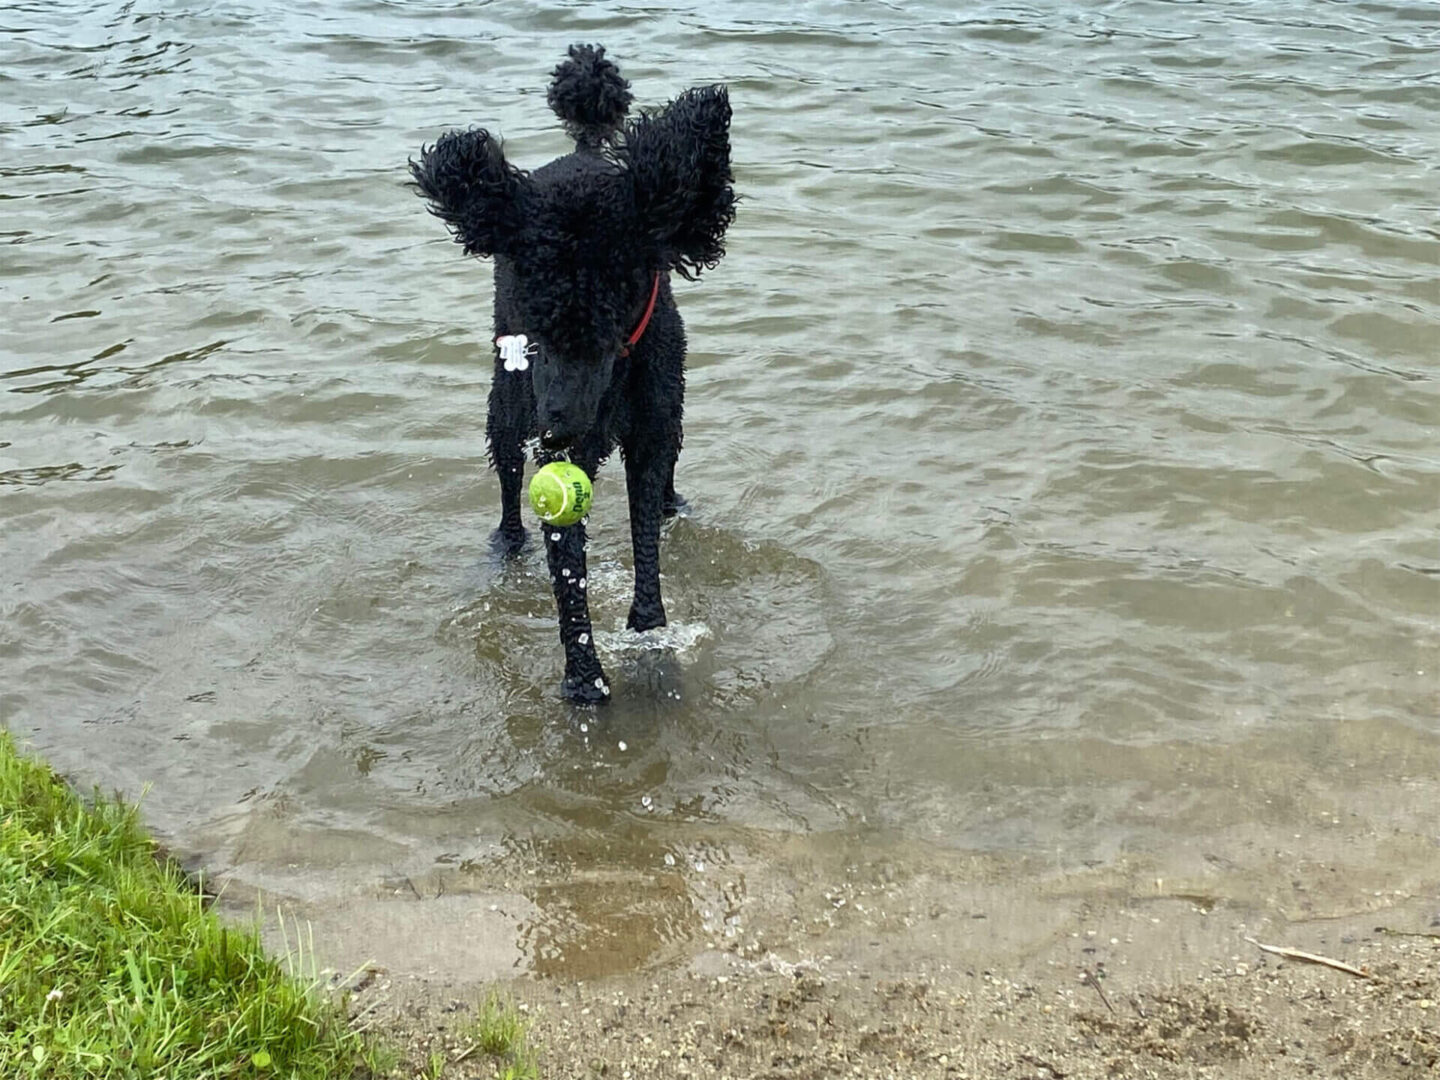 A black color dog holding the ball in its mouth